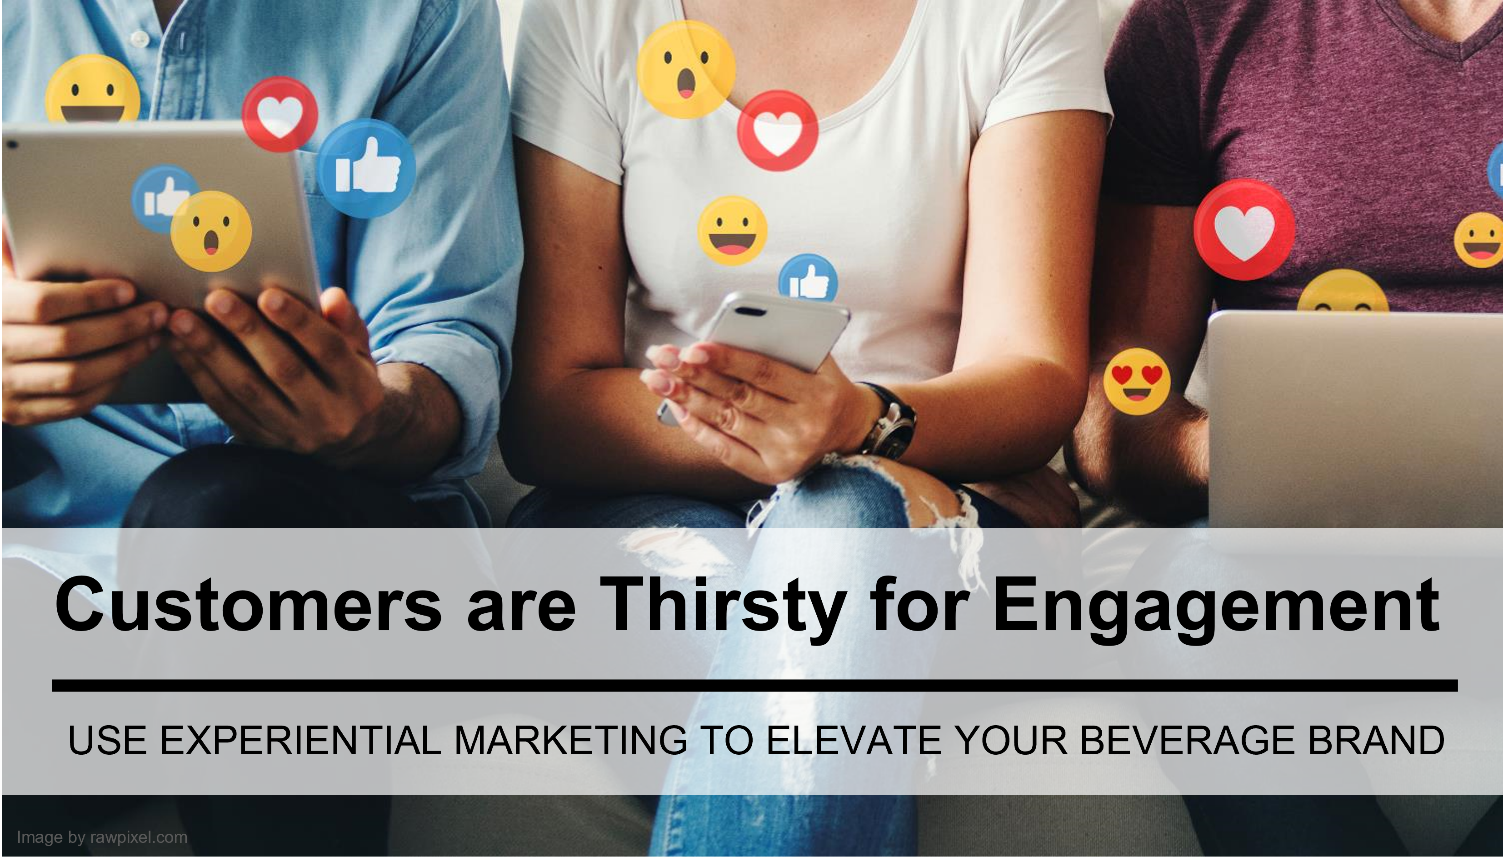 Customers are Thirsty for Engagement: Use Experiential Marketing to Elevate Your Beverage Brand